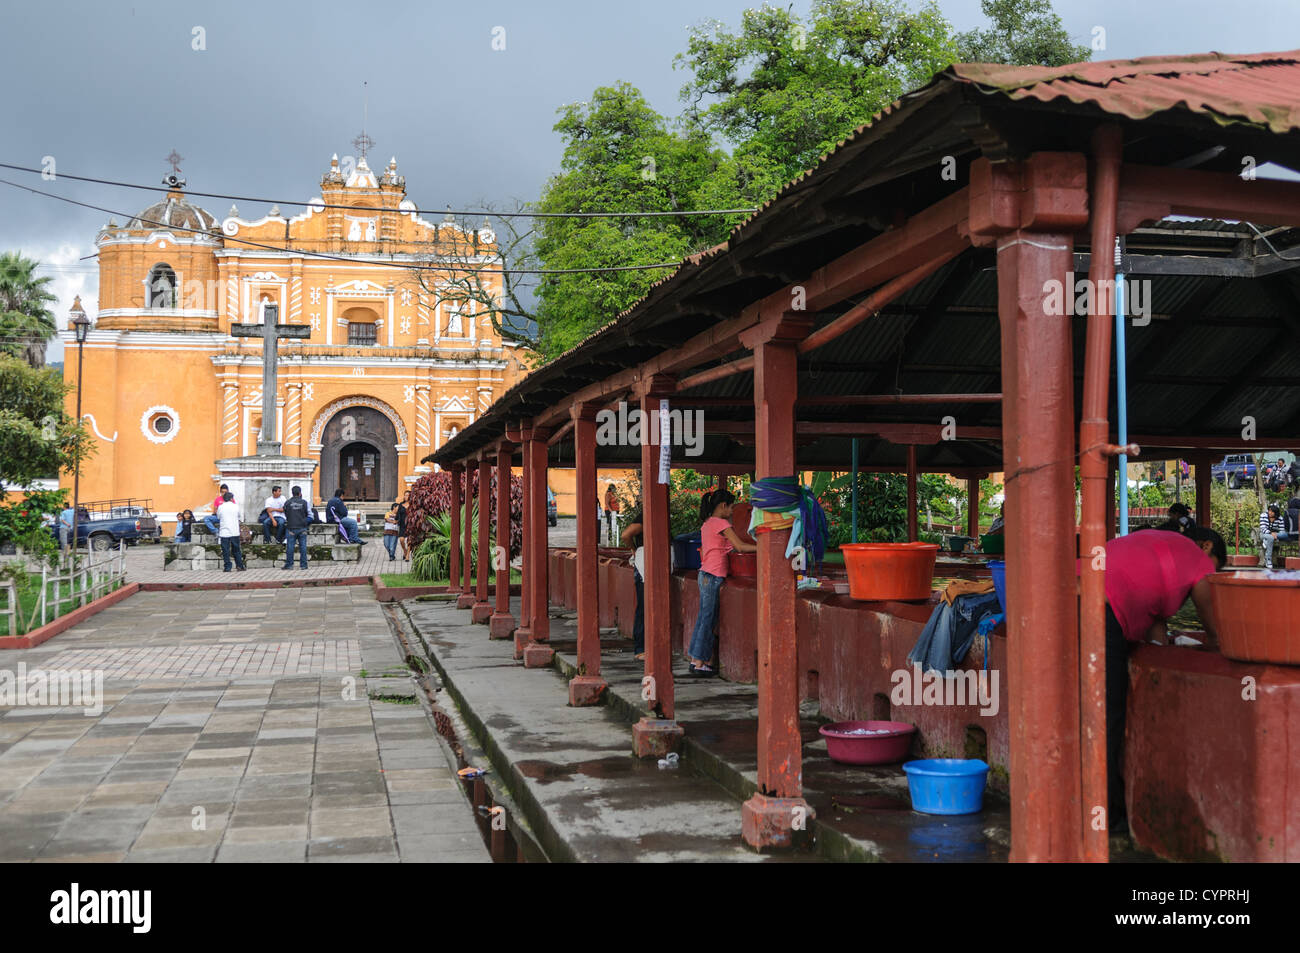 The burnt sienna colored Iglesia en San Pedro las Huertas, about 15 minutes away from Antigua, Guatemala. At right are communial washing areas. Stock Photo